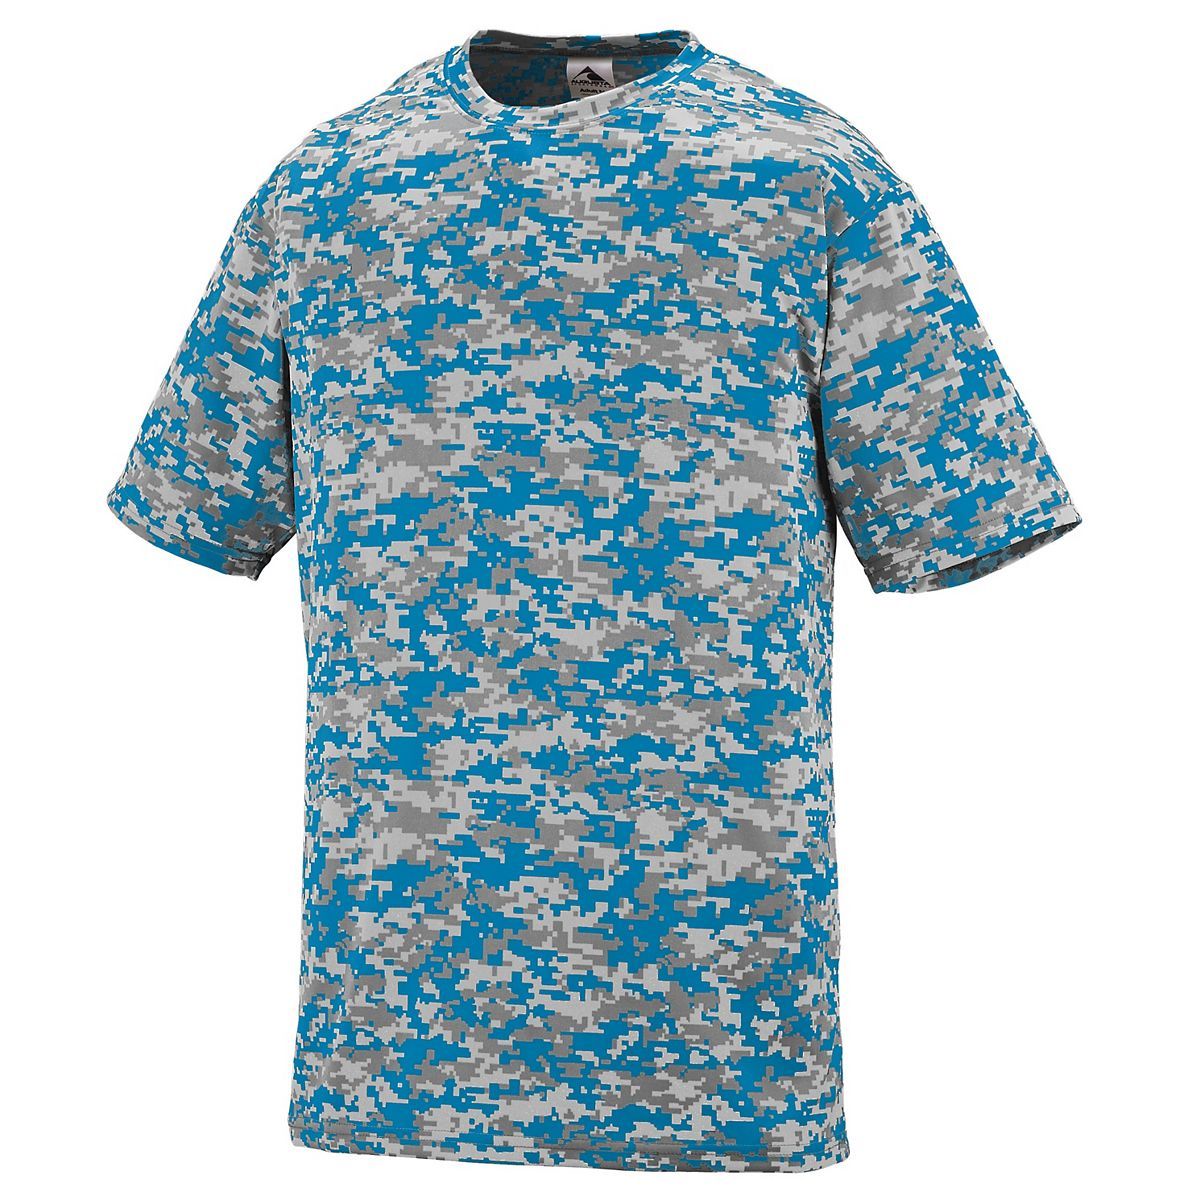 Augusta Sportswear Youth Digi Camo Wicking T-Shirt in Power Blue Digi  -Part of the Youth, Youth-Tee-Shirt, T-Shirts, Augusta-Products, Shirts product lines at KanaleyCreations.com